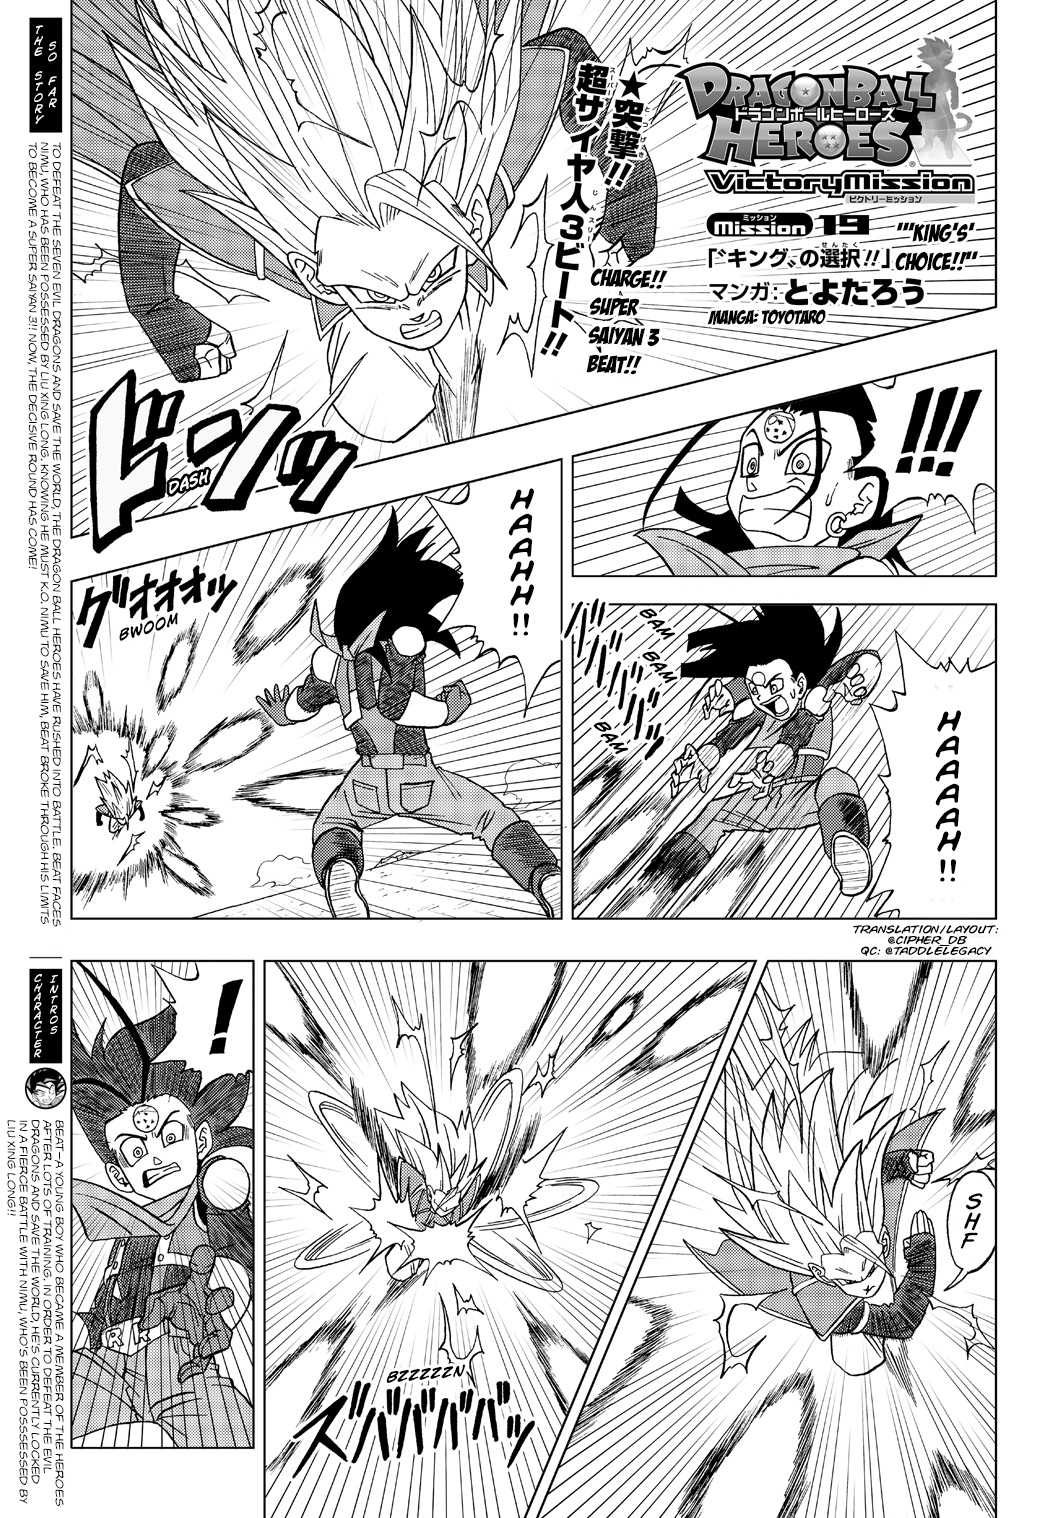 Dragon Ball Heroes - Victory Mission Chapter 19: 